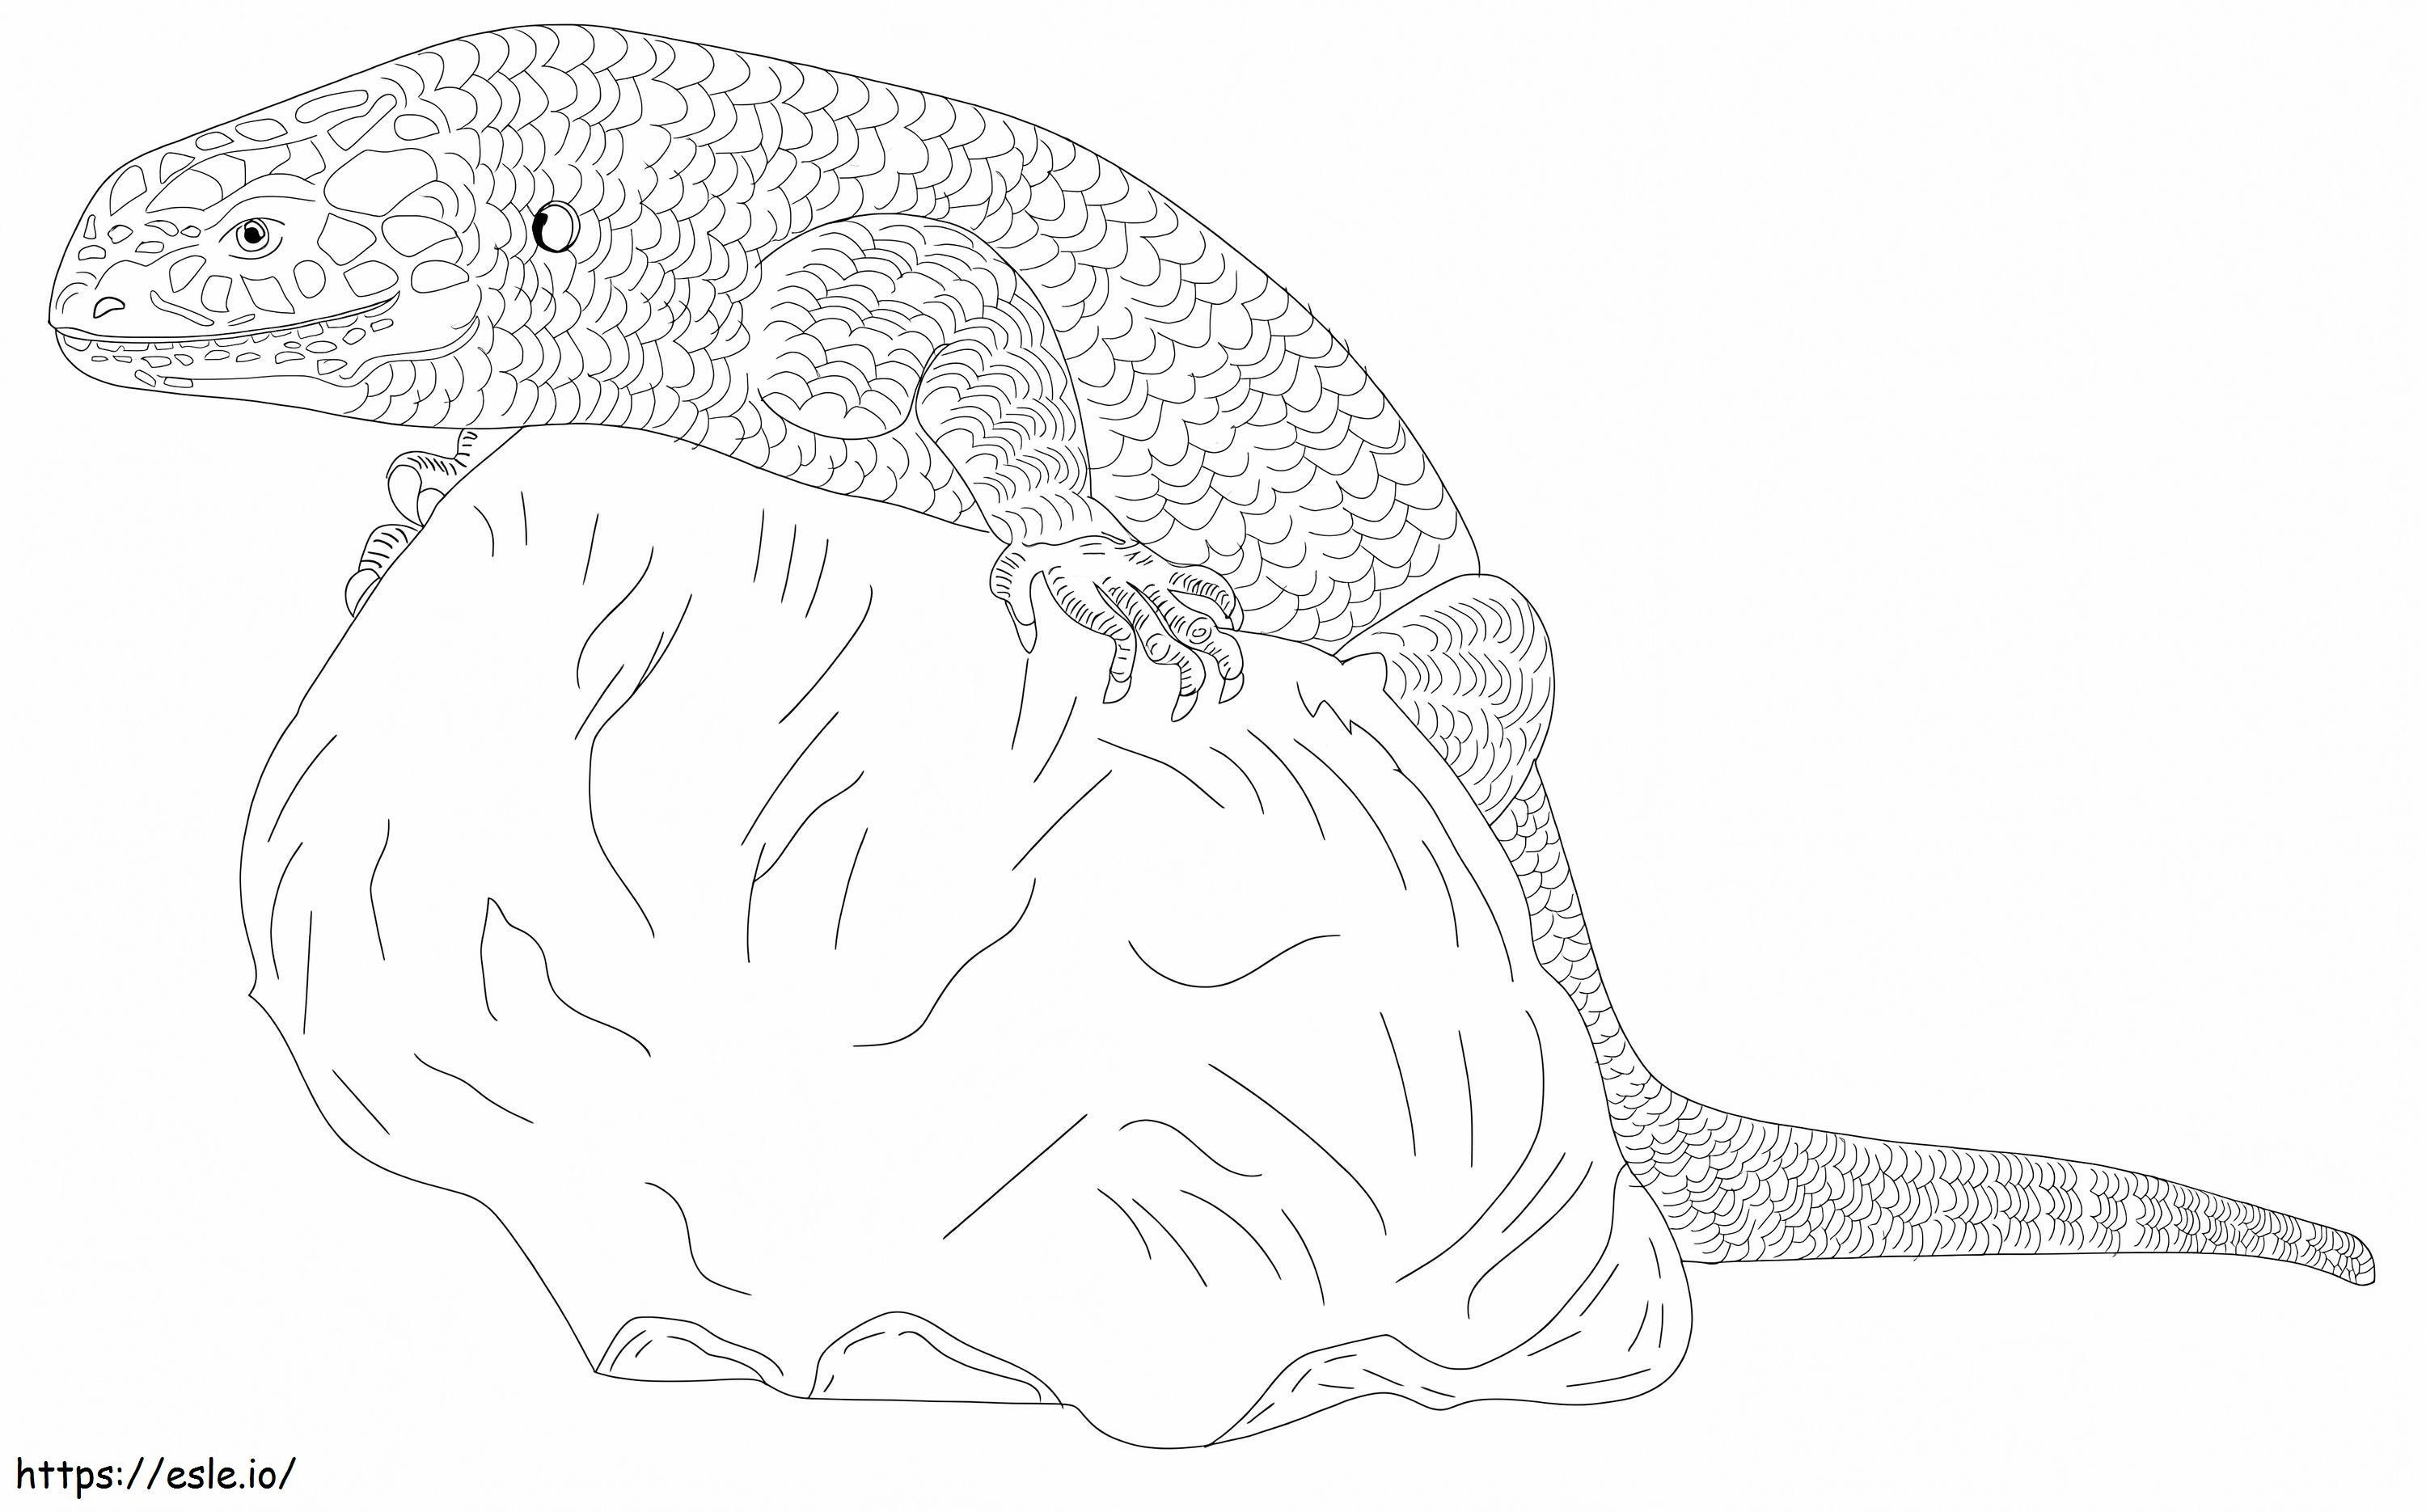 Giant Skink coloring page